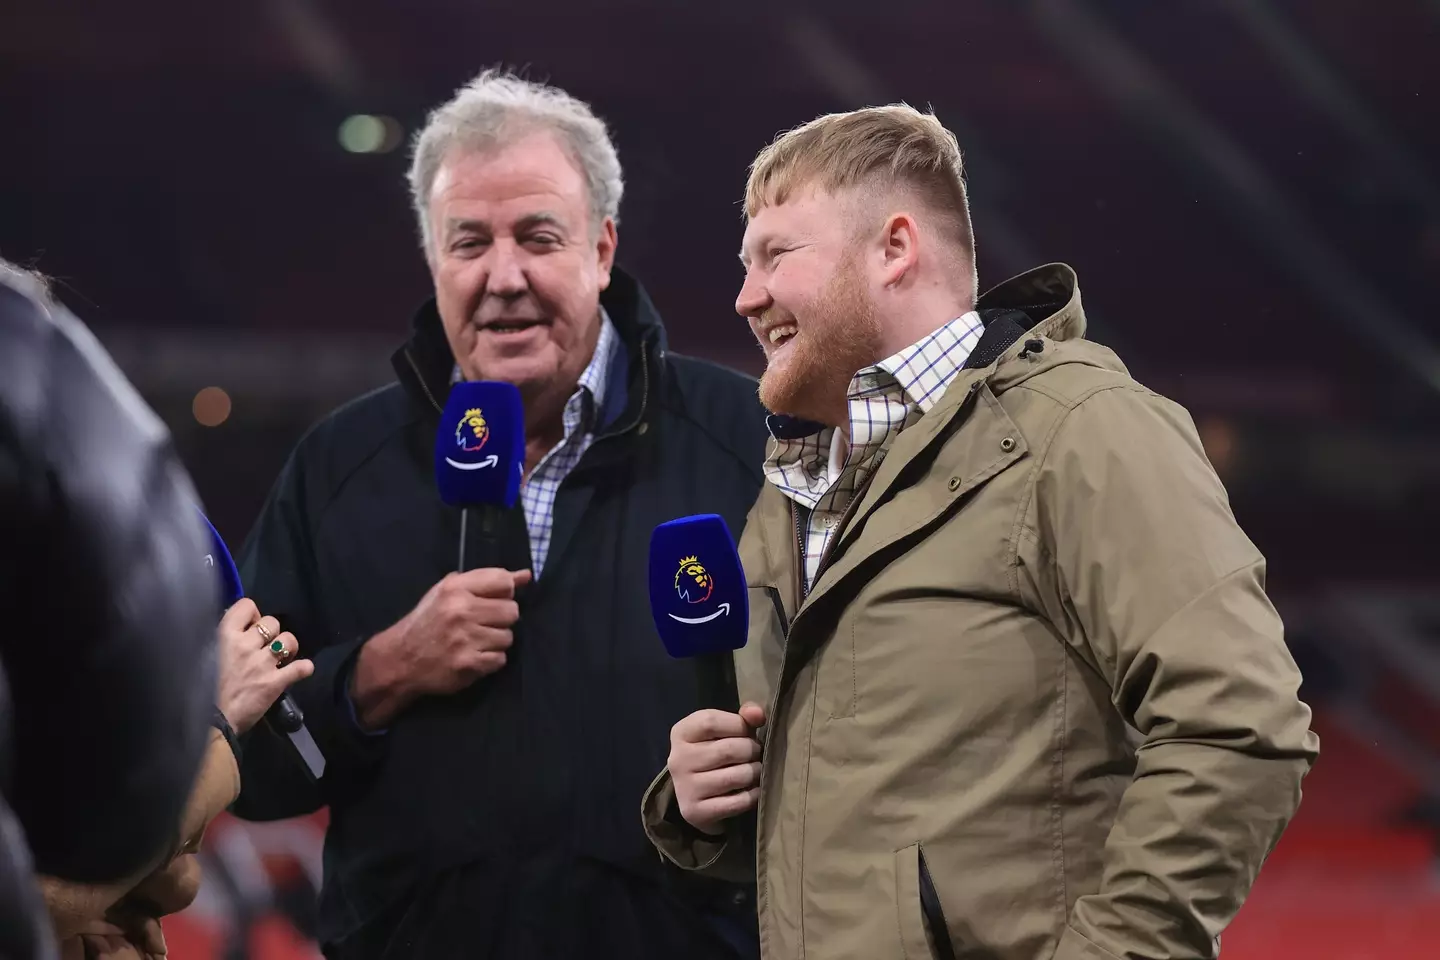 Kaleb Cooper and Jeremy Clarkson at Old Trafford (Simon Stacpoole/Offside/Offside via Getty Images)